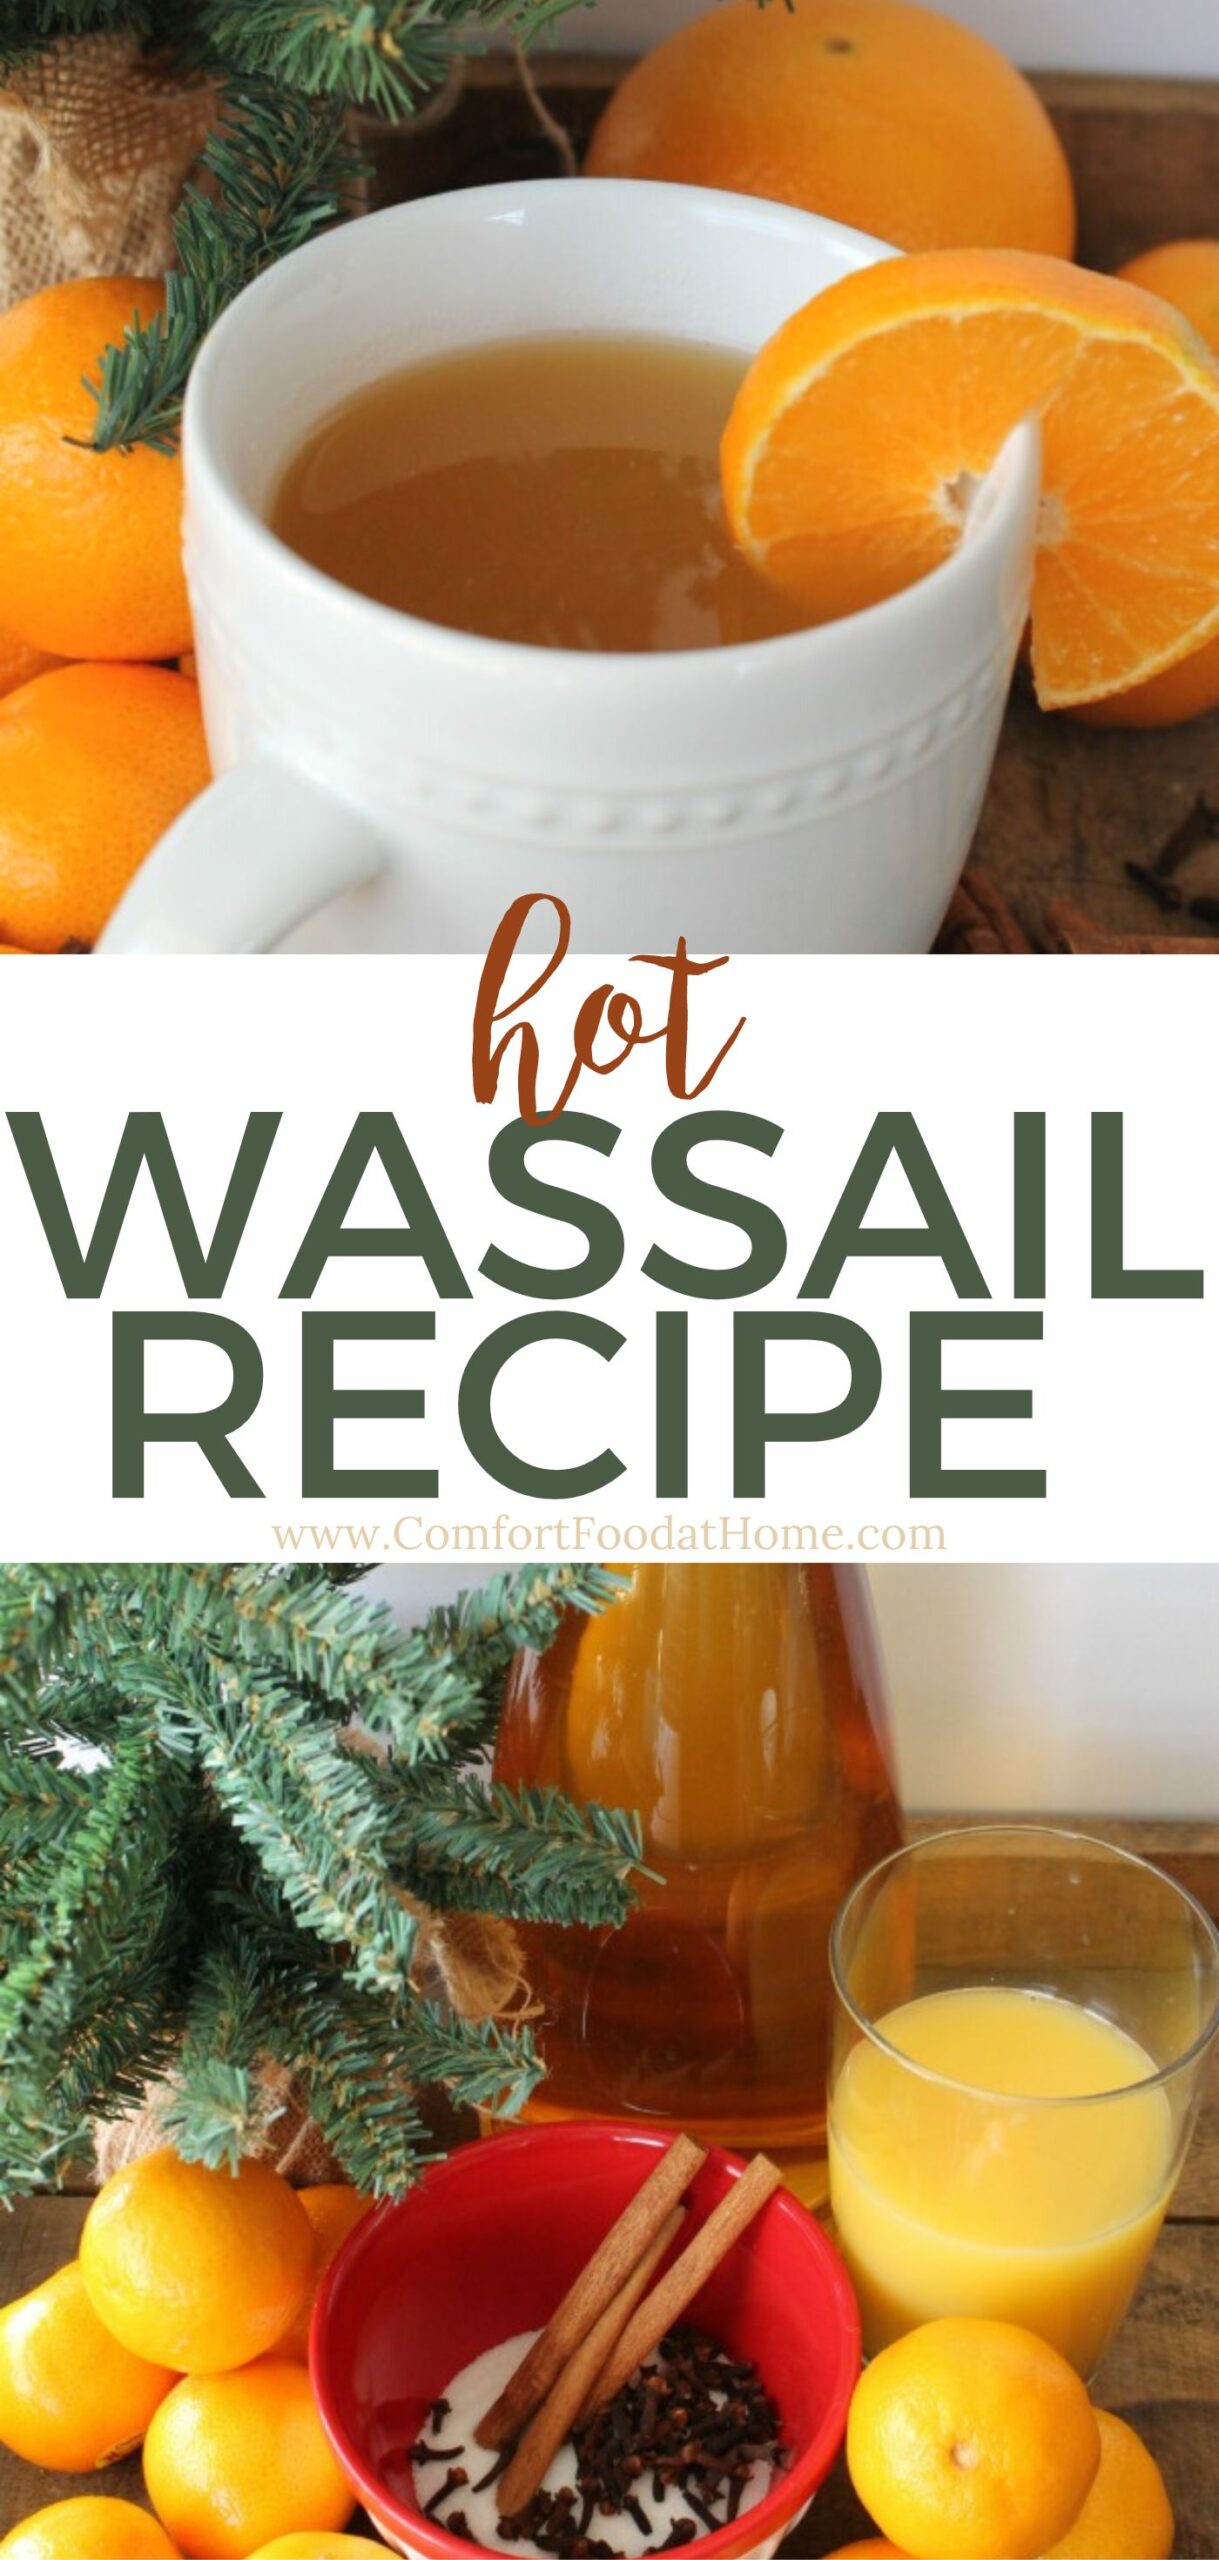 Traditional Hot Wassail Drink Recipe - Comfort Food at Home